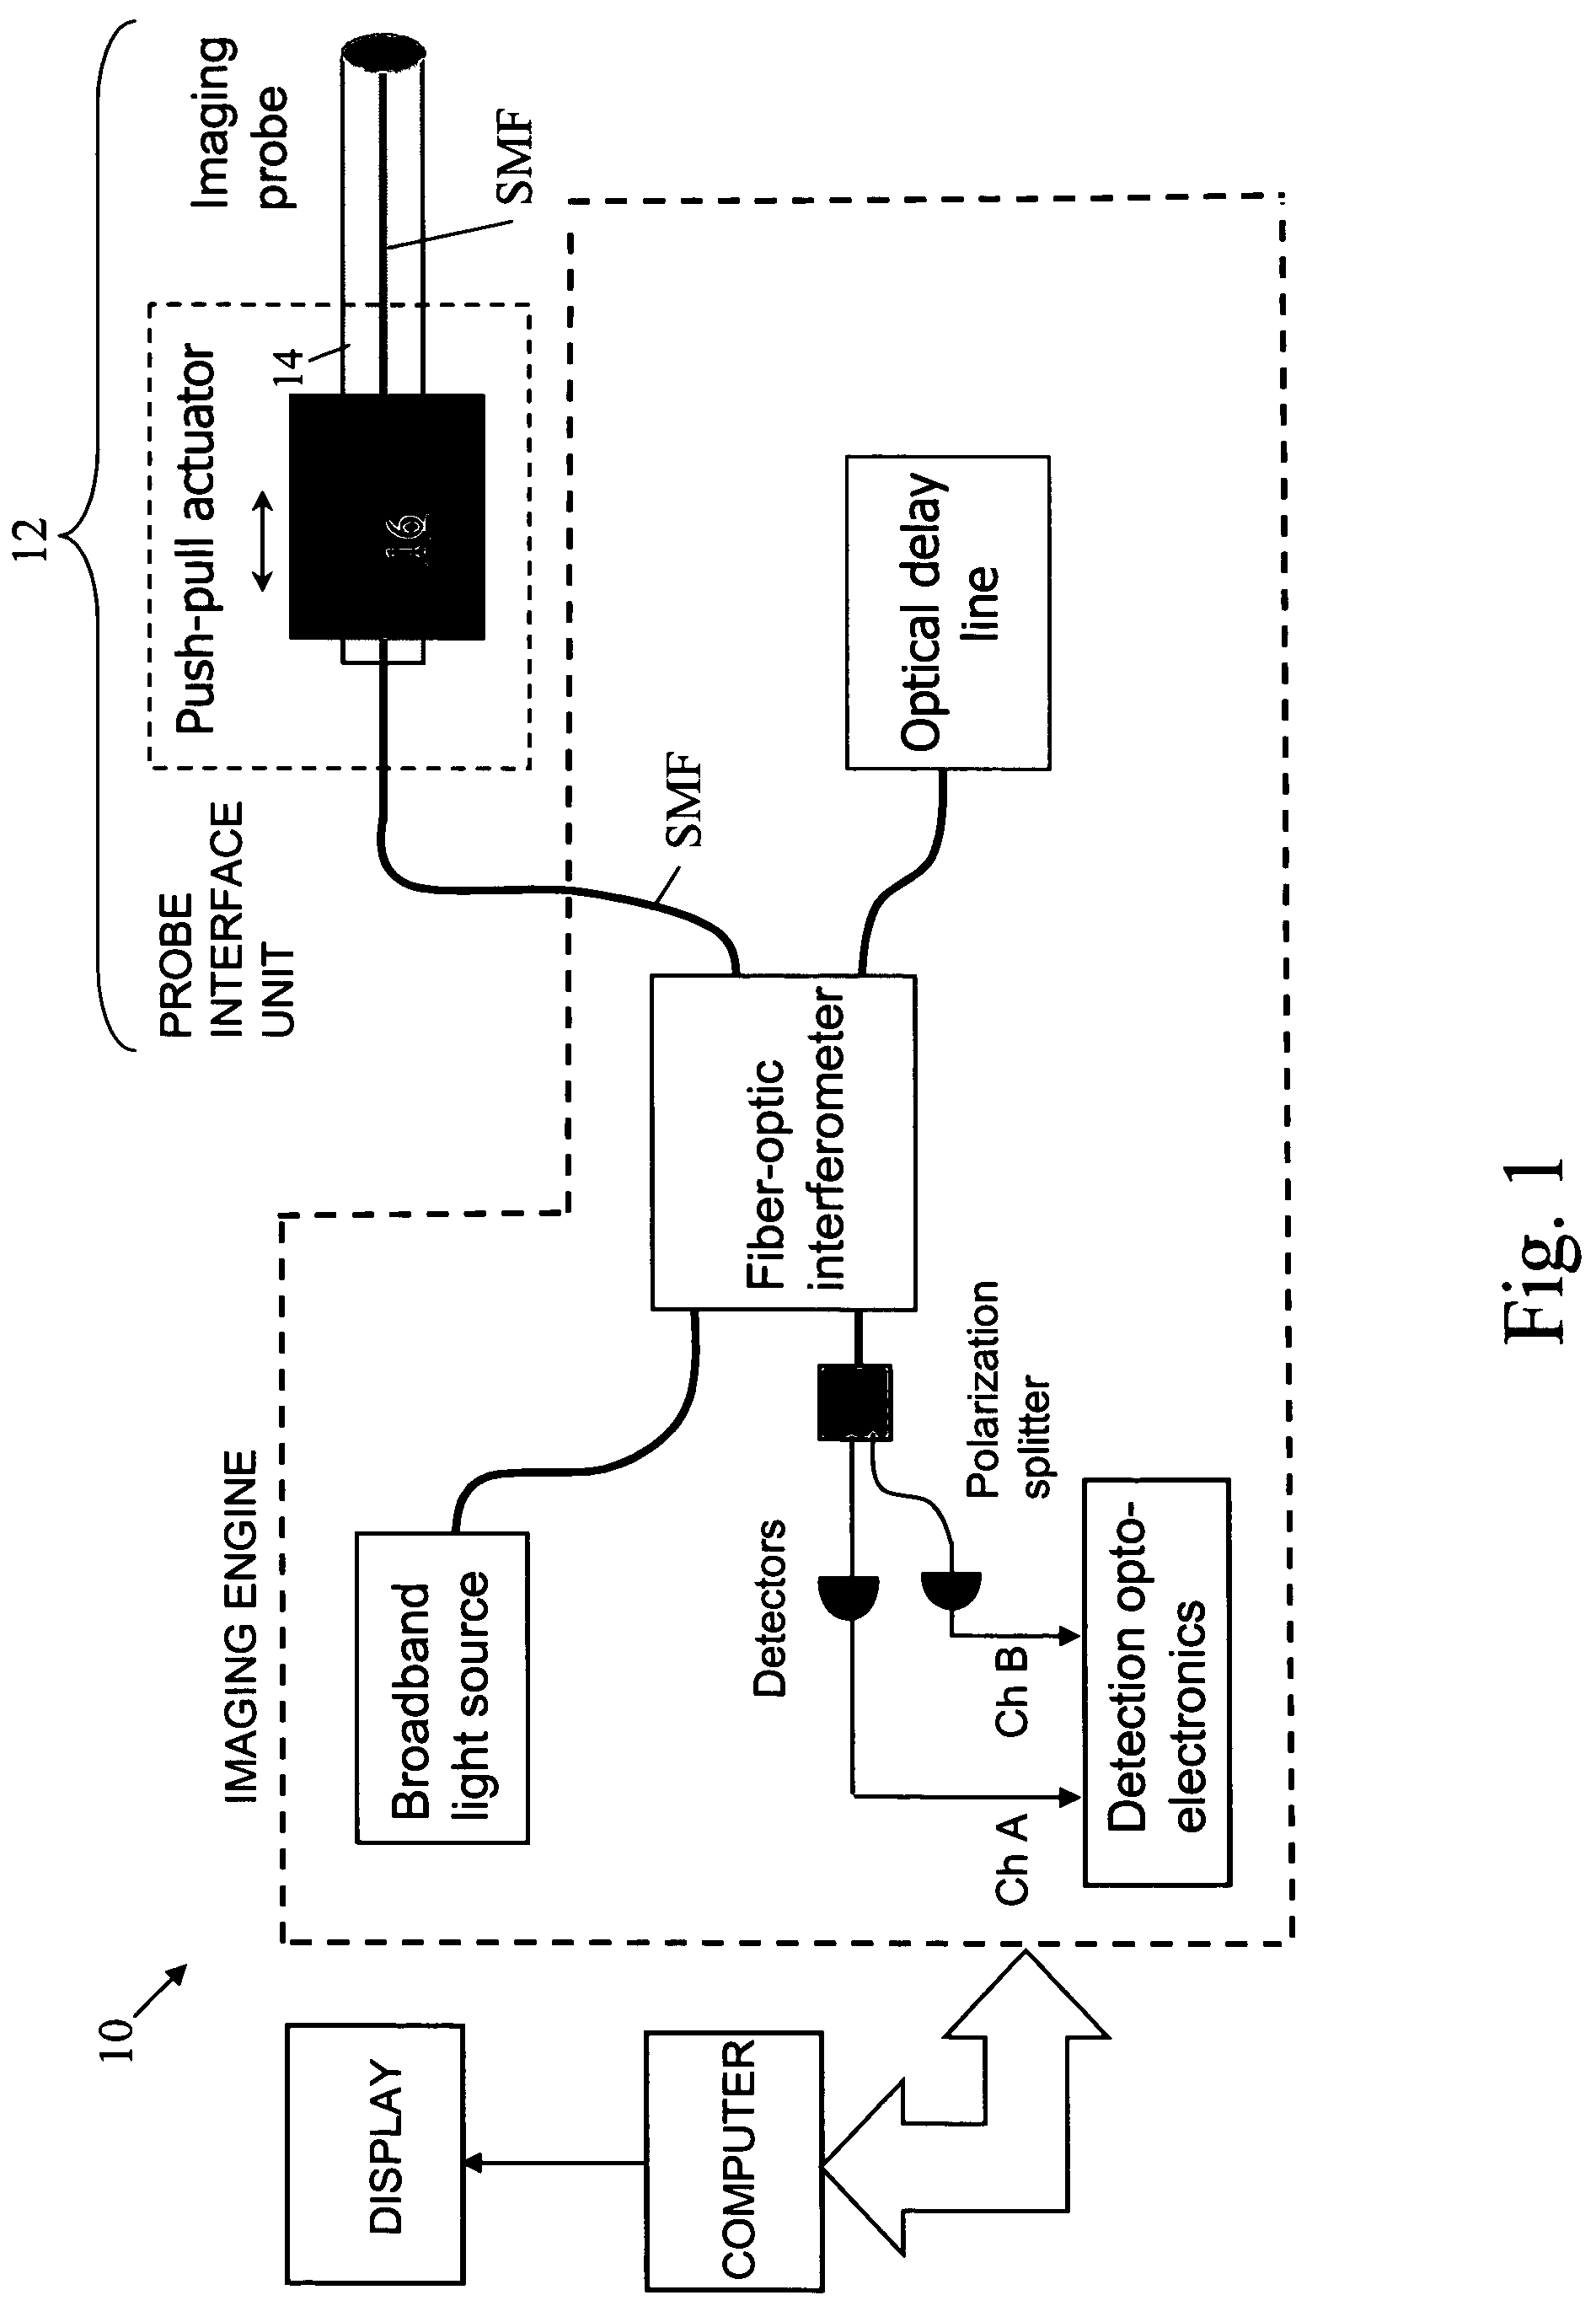 Optical coherence tomography apparatus and methods